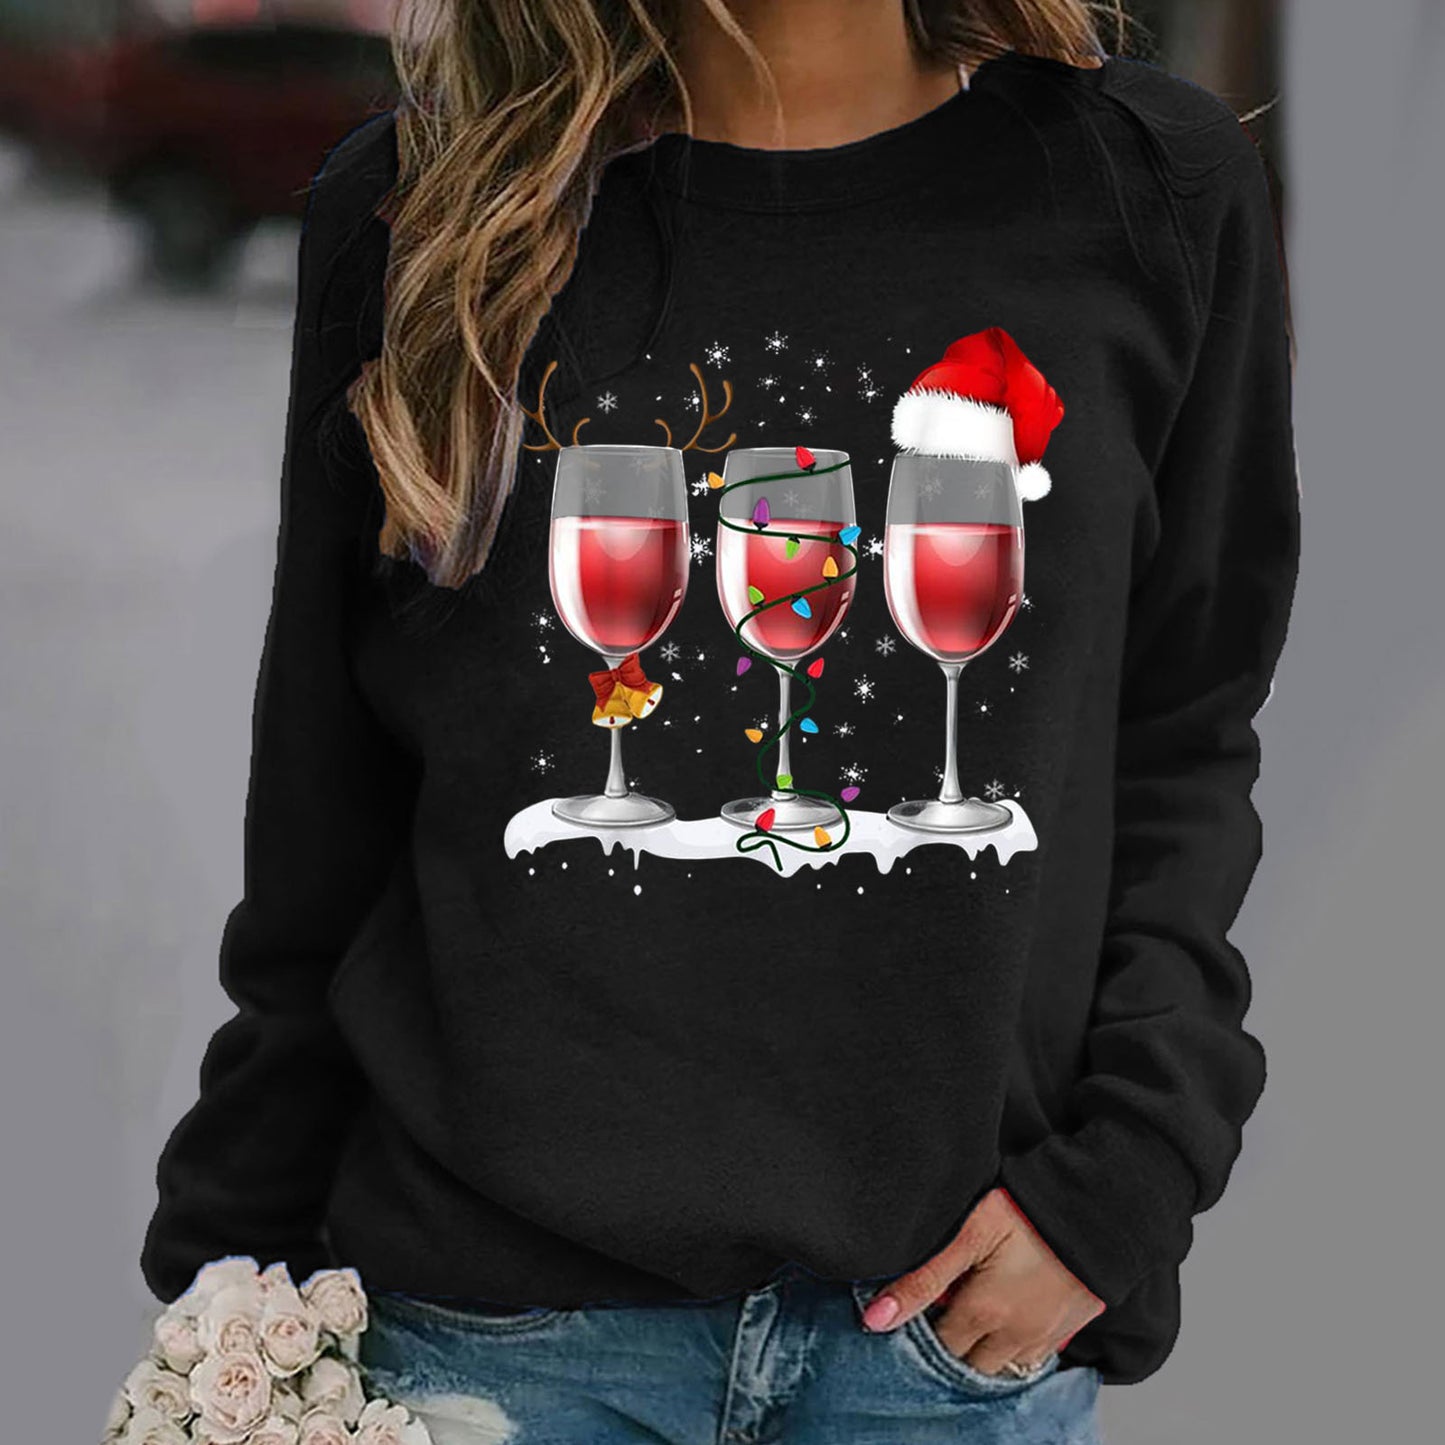 Women’s Long sleeve pullover - Printed Long Sleeve Round-neck Sweater For Women